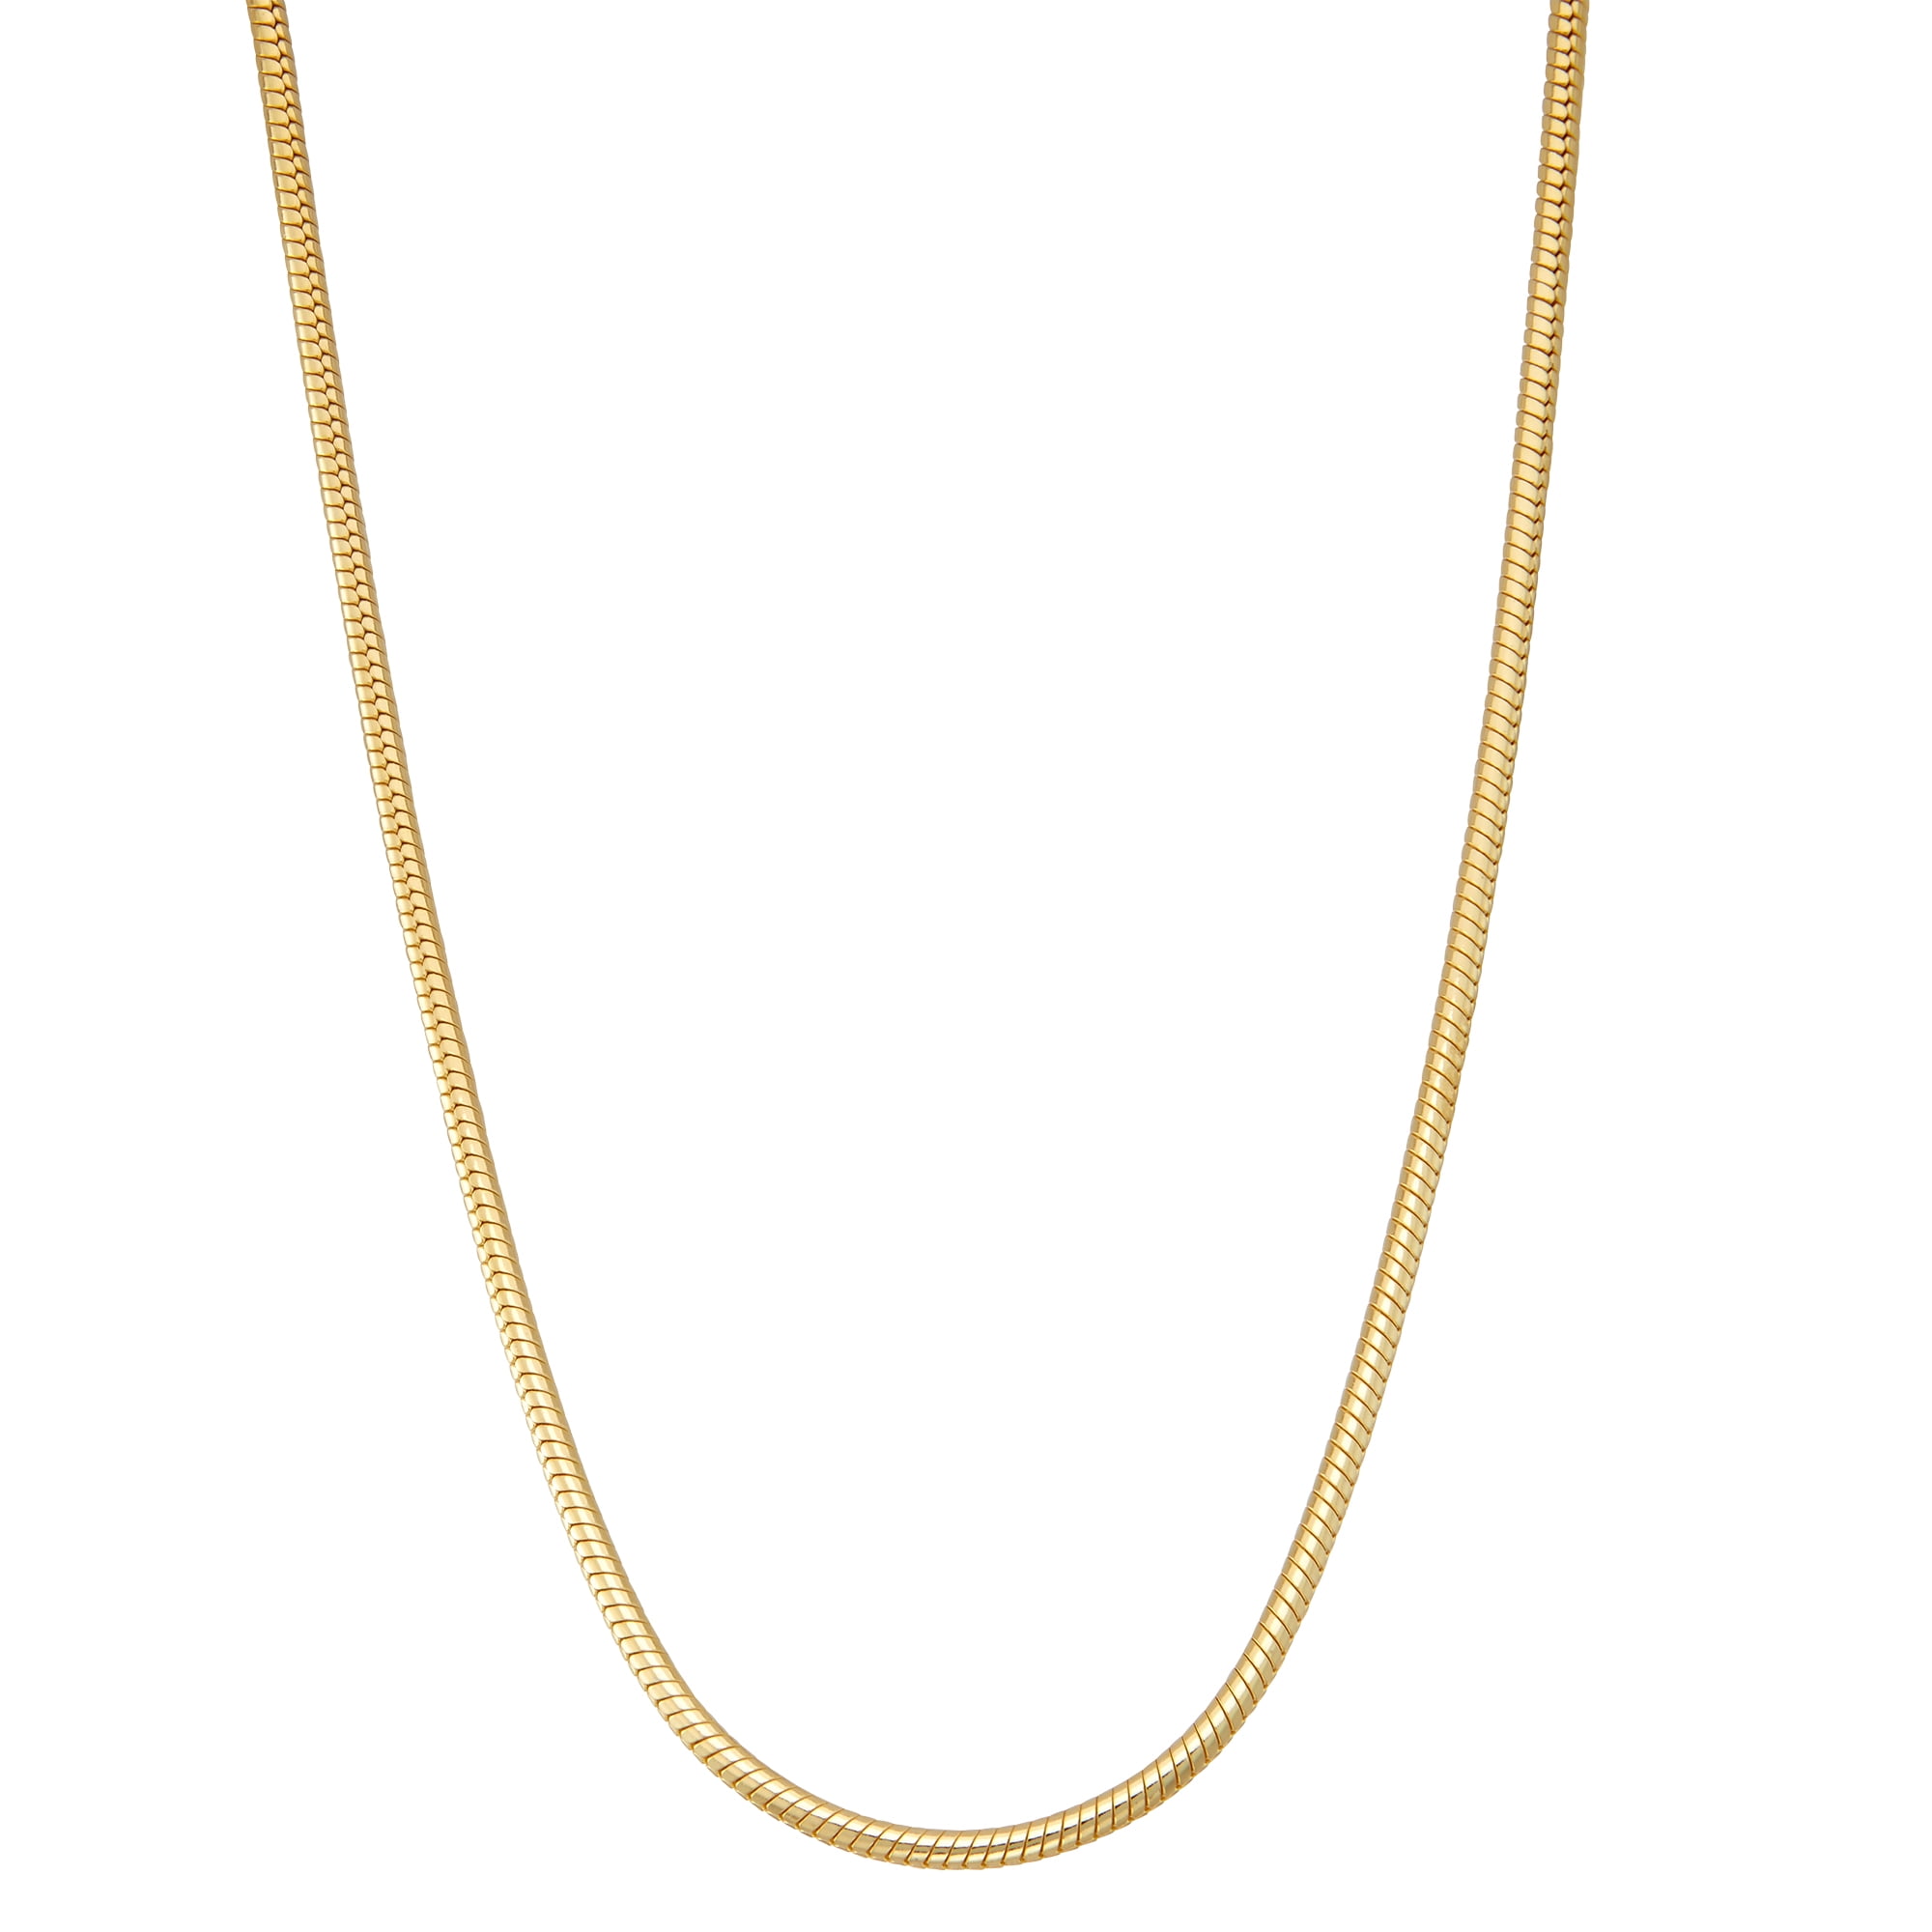 Details about   New Chisel Men’s 2 mm Snake Chain Necklace 22” Length 